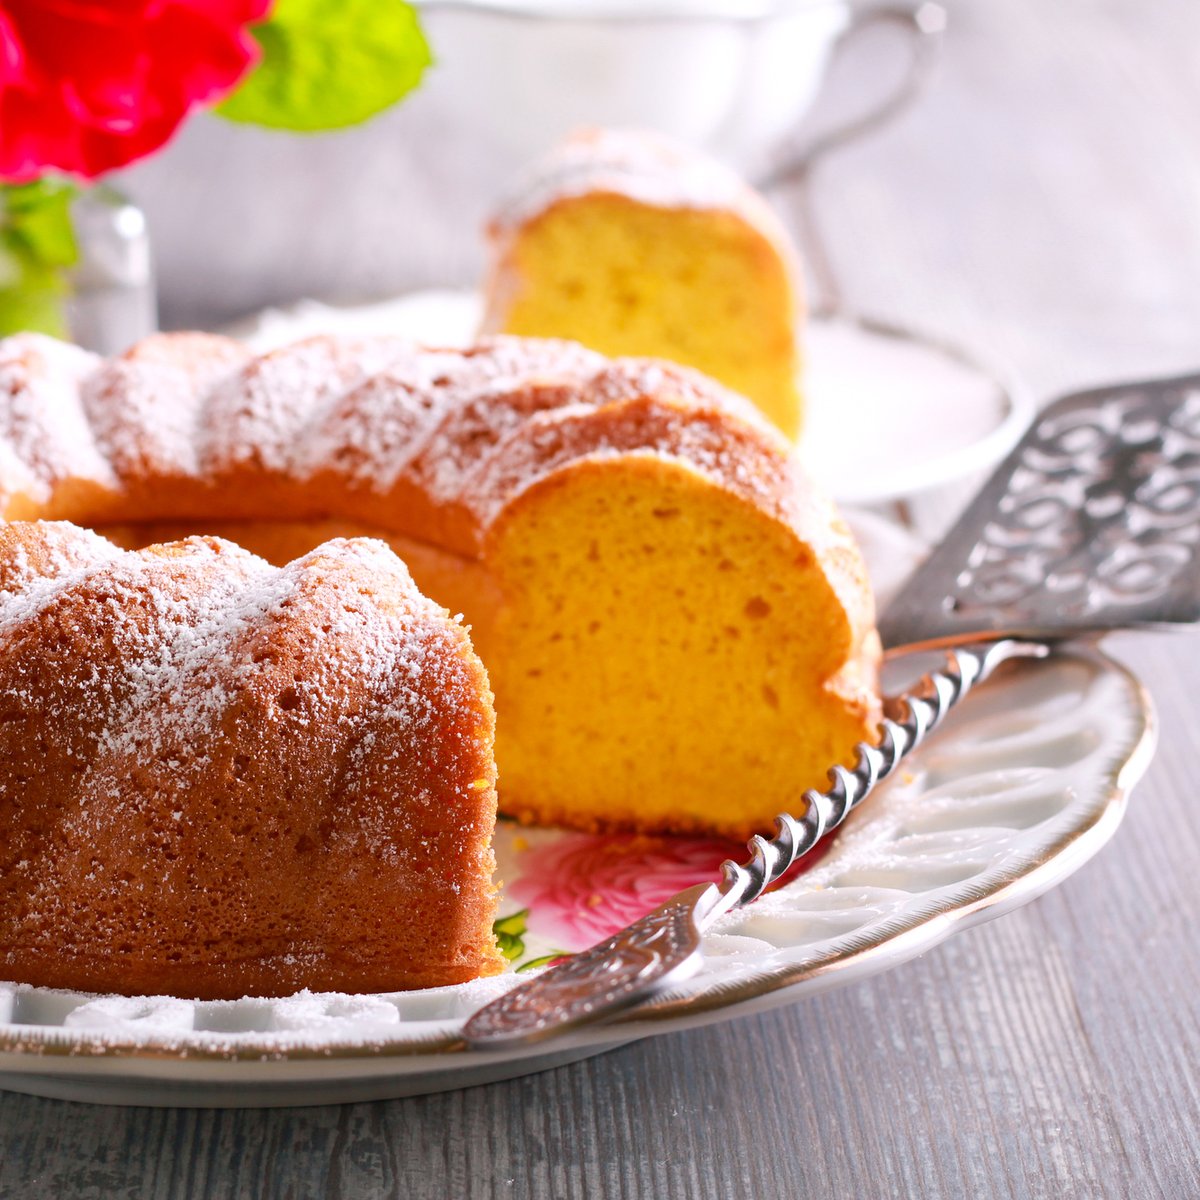 We love a good solid roof, but we love food, too! Happy Lemon Chiffon Cake Day! Invented in 1927, lemon chiffon cake got its start in California by then-insurance salesman Henry Baker, then sold the recipe to Betty Crocker in 1947. #lemonchiffoncake #lemons #baking #cakeeveryday